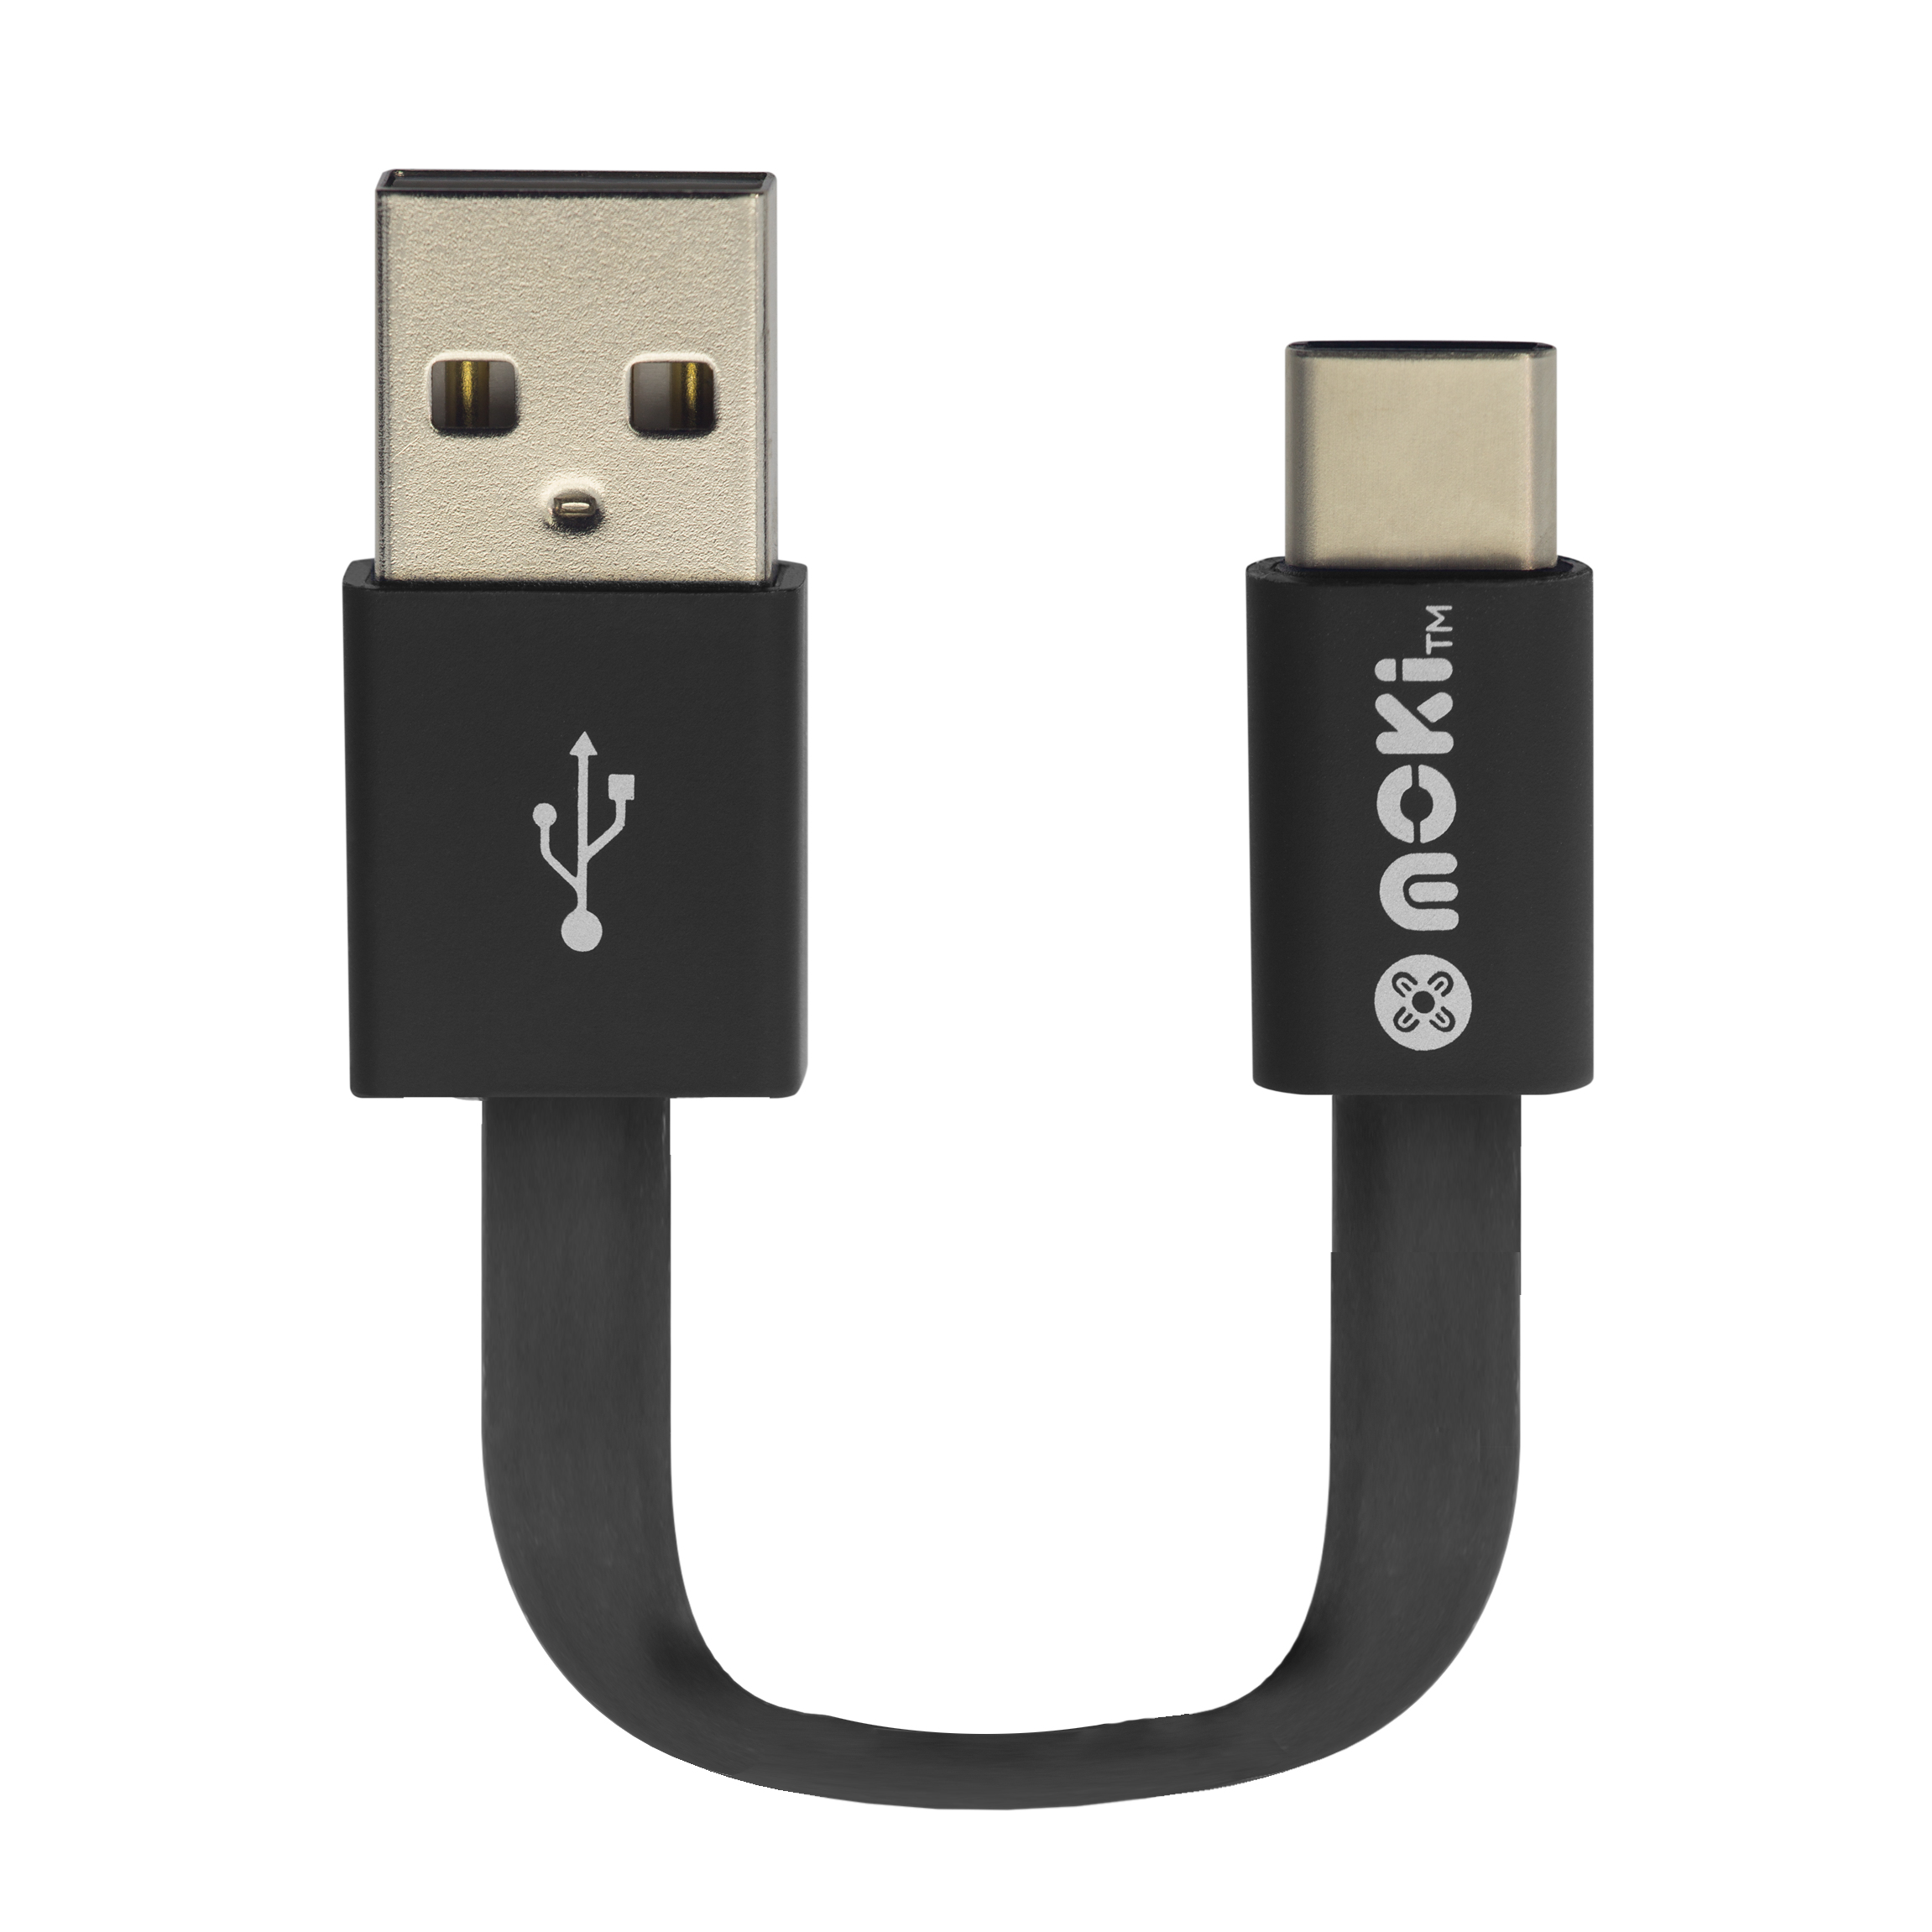 MPocket Type-C SynCharge Cable – 10cm/4″